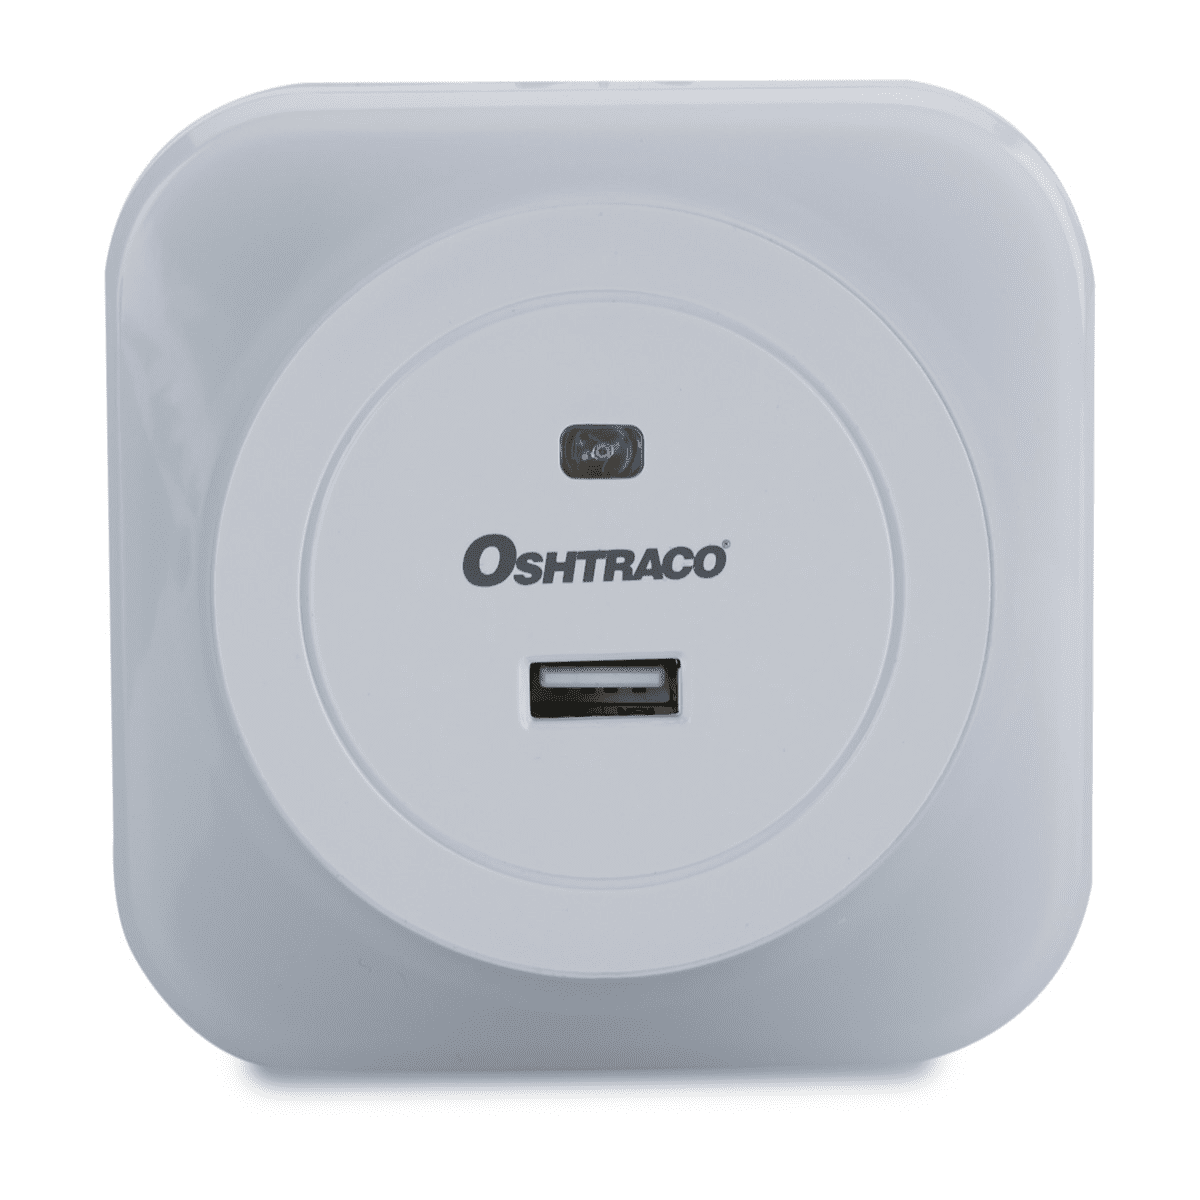 Oshtraco Night Light with USB Charger